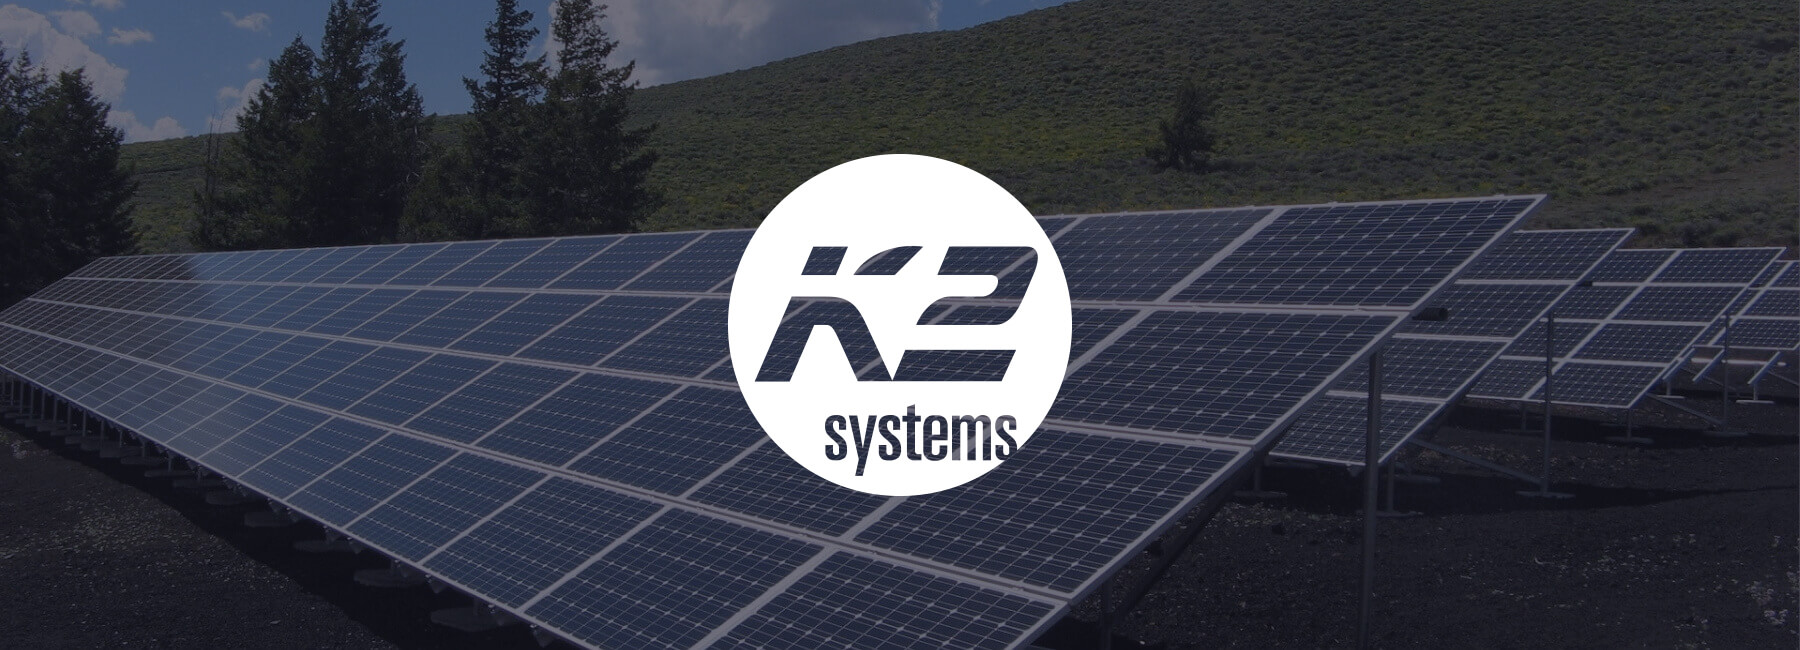 K2 Systems launches Mopinion within its planning software